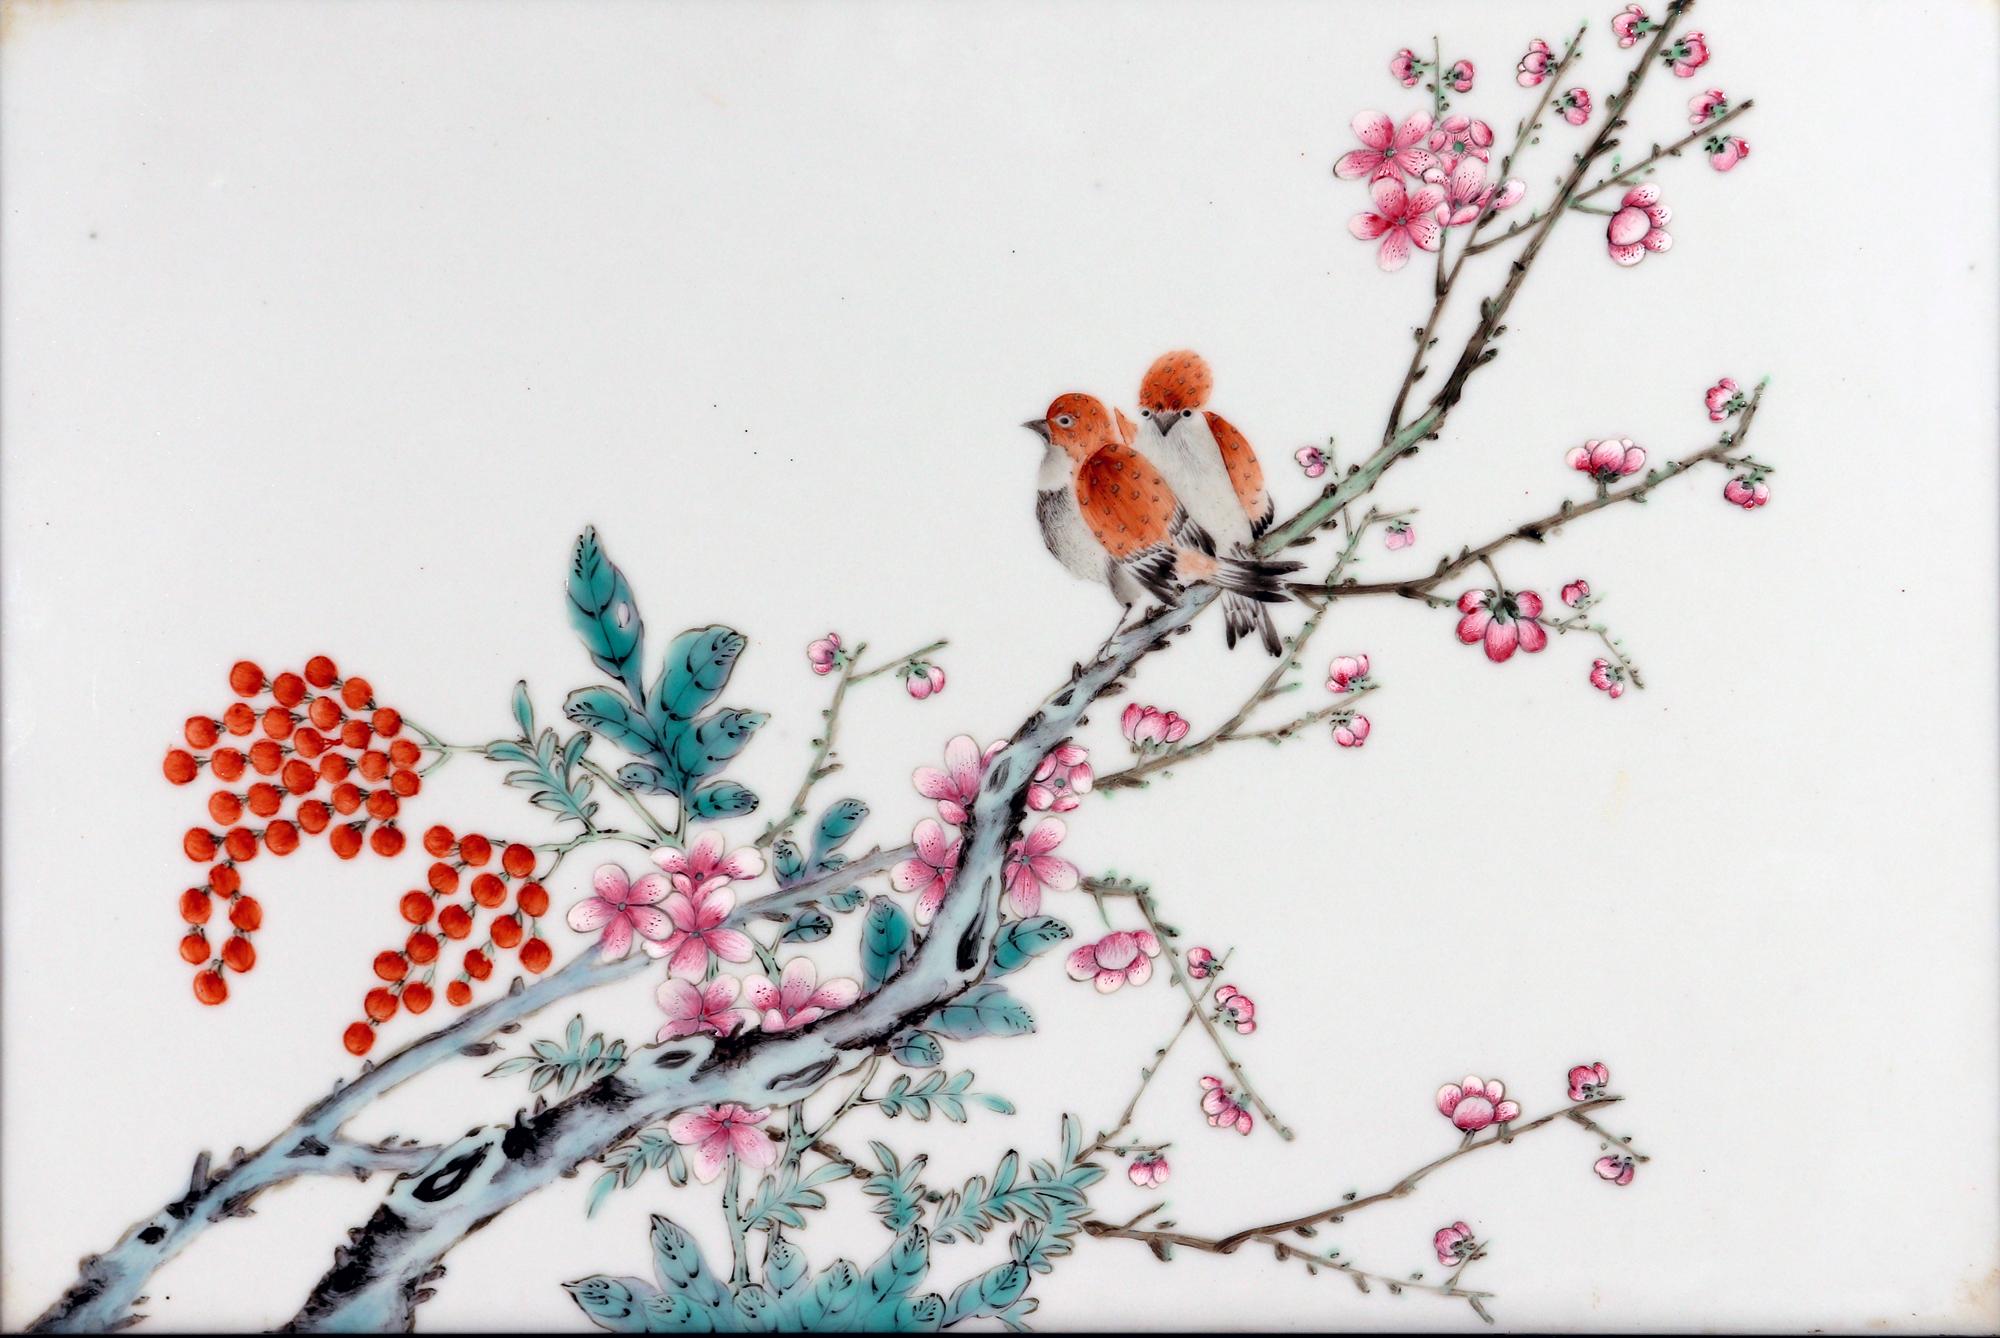 Chinese Porcelain Framed Famille Rose Pair of Plaques of Birds with Prunus and Cherry Trees,
20th Century

The beautiful large plaque, in a horizontal format, depicts a pair of birds  perched on a flowering branch with pink flowers with a second